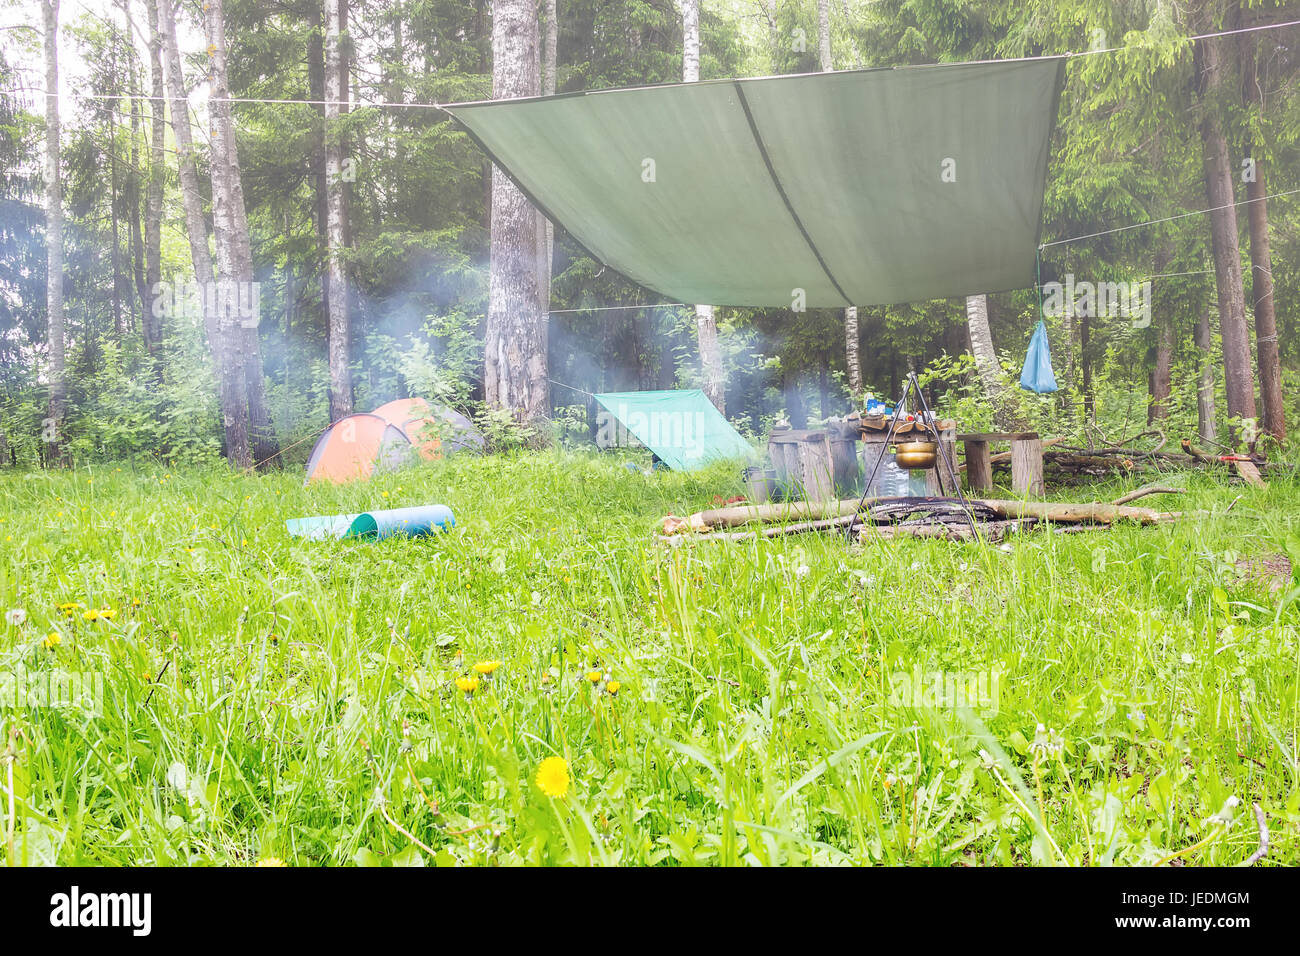 A foggy morning in a tent camp on the edge of the forest Stock Photo